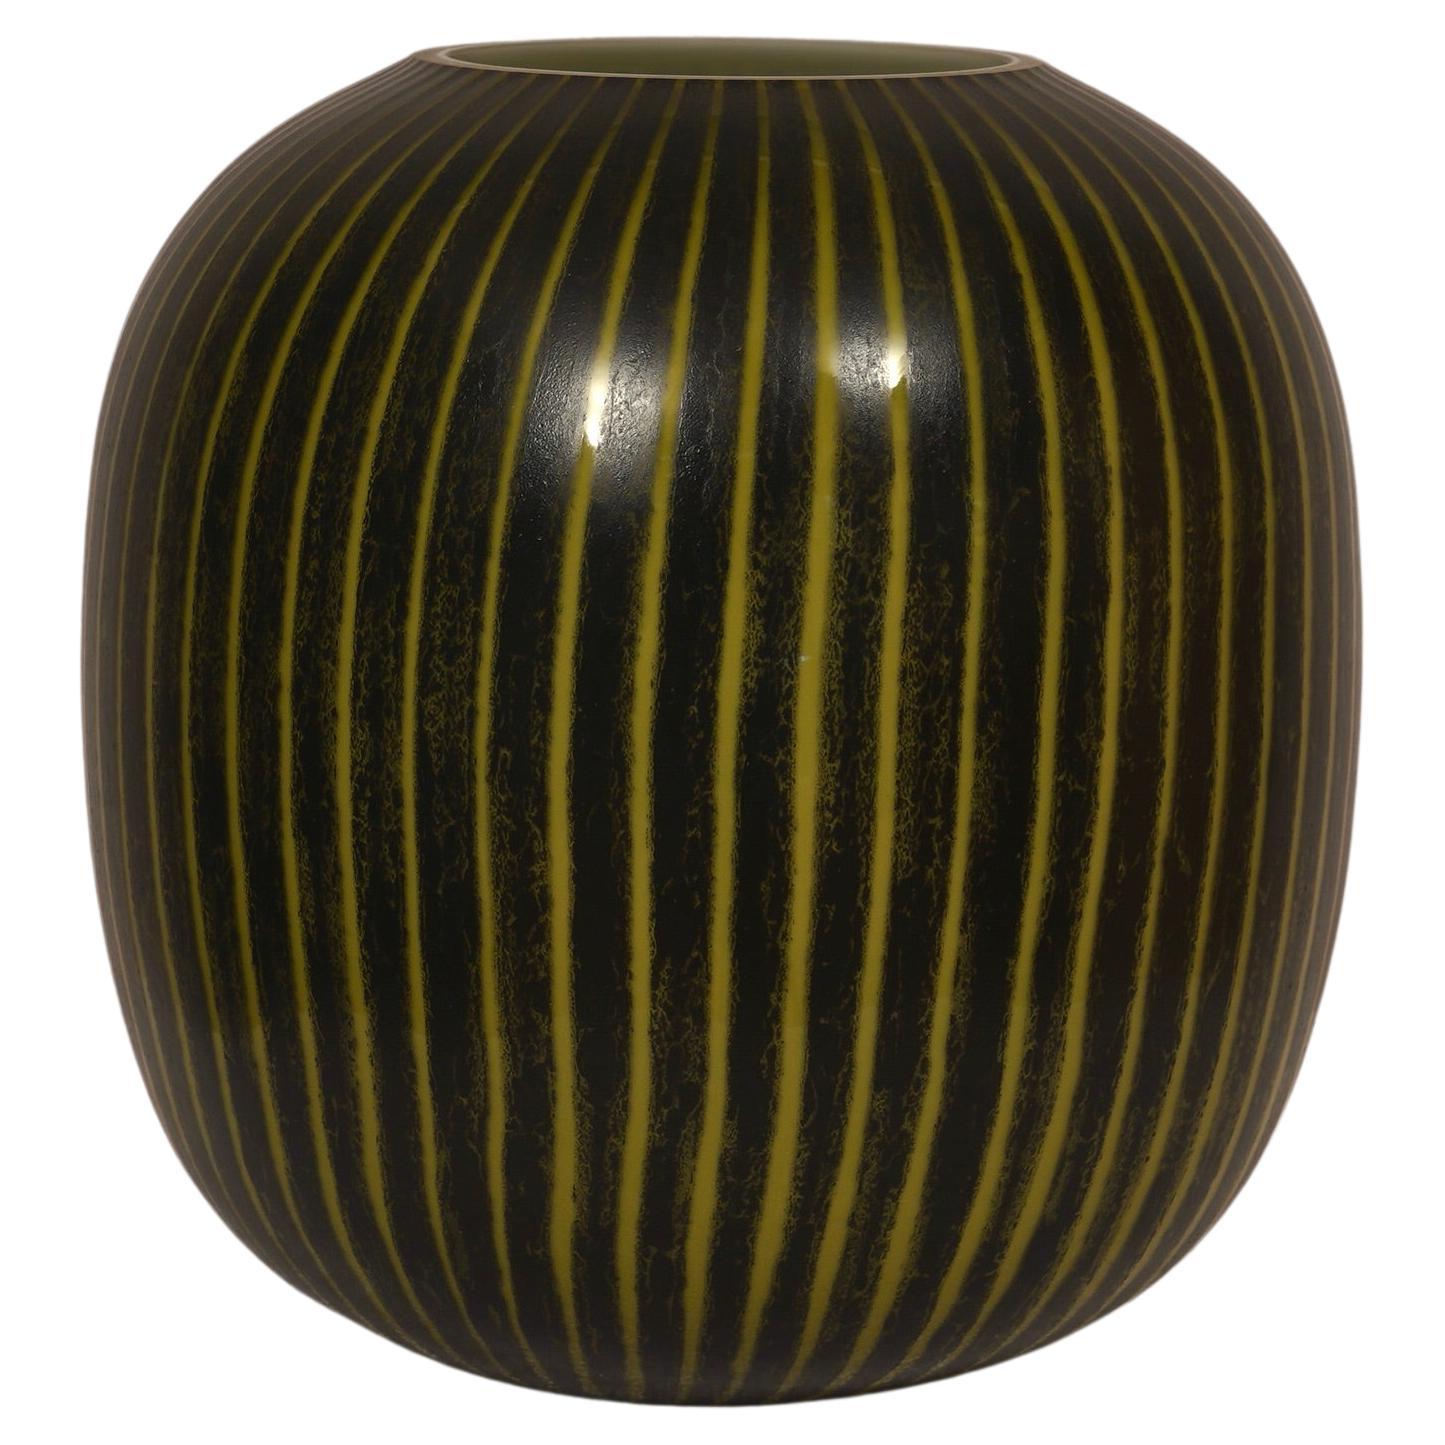 Murano Black and Yellow Art Glass Vase, 1950 For Sale